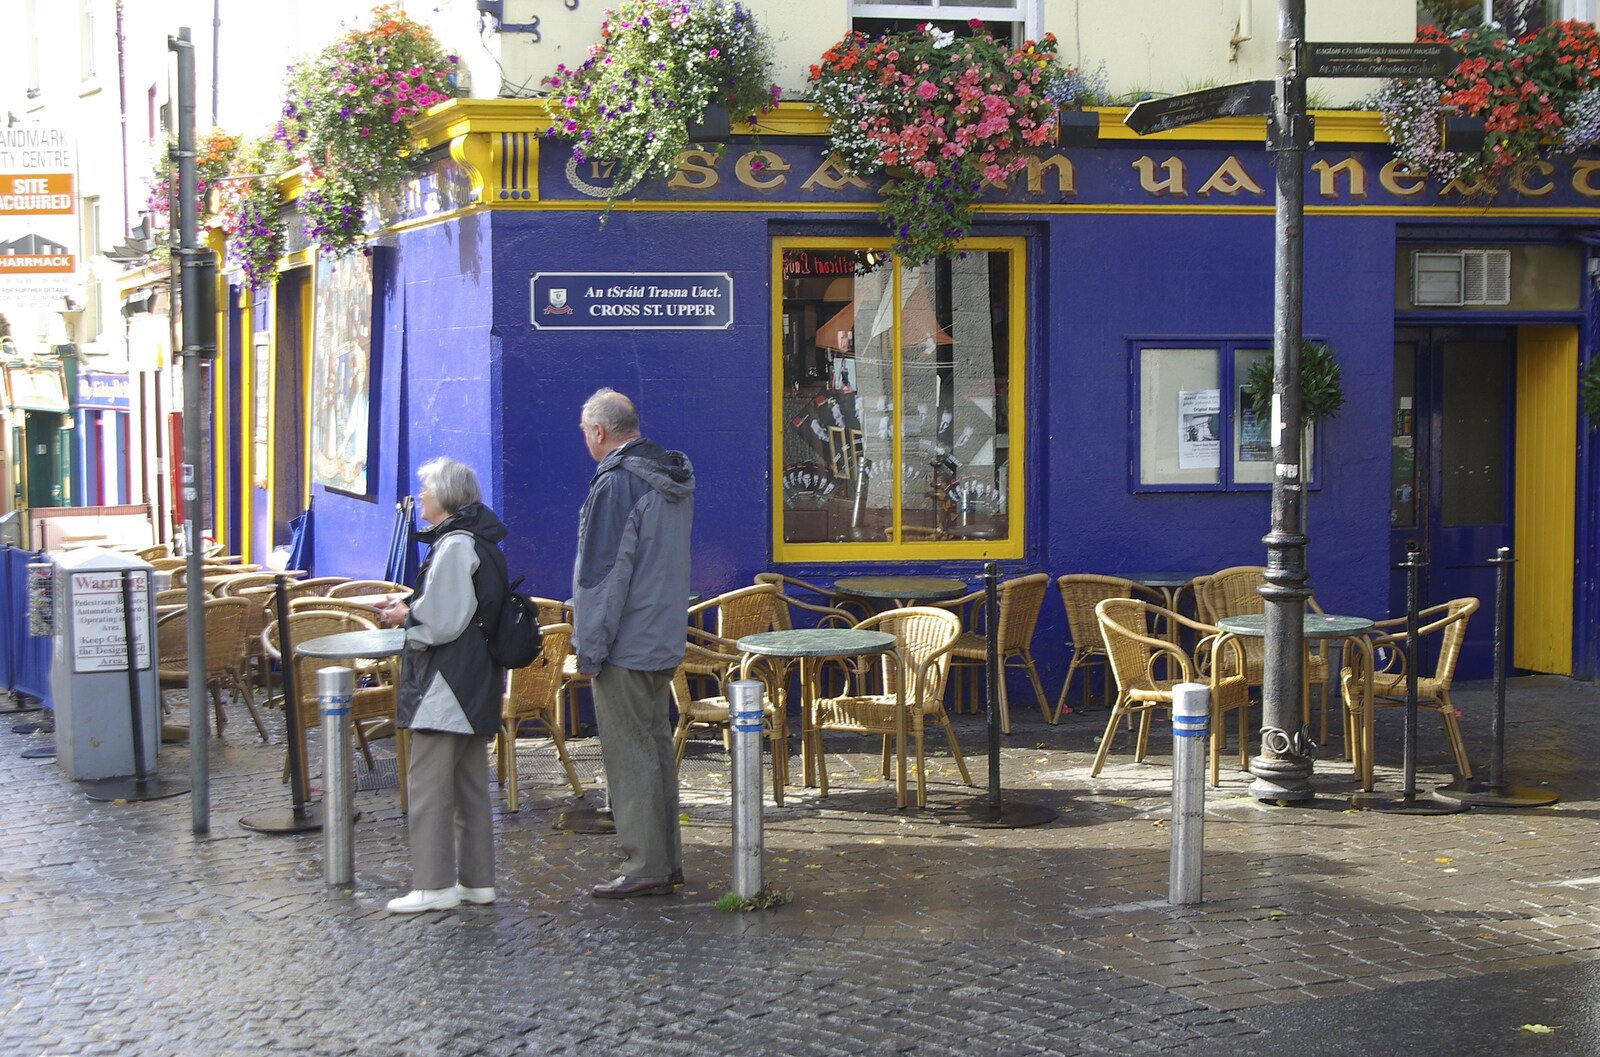 Kilkee to Galway, Connacht, Ireland - 23rd September 2007: Outside a blue and yellow bar on Cross Street